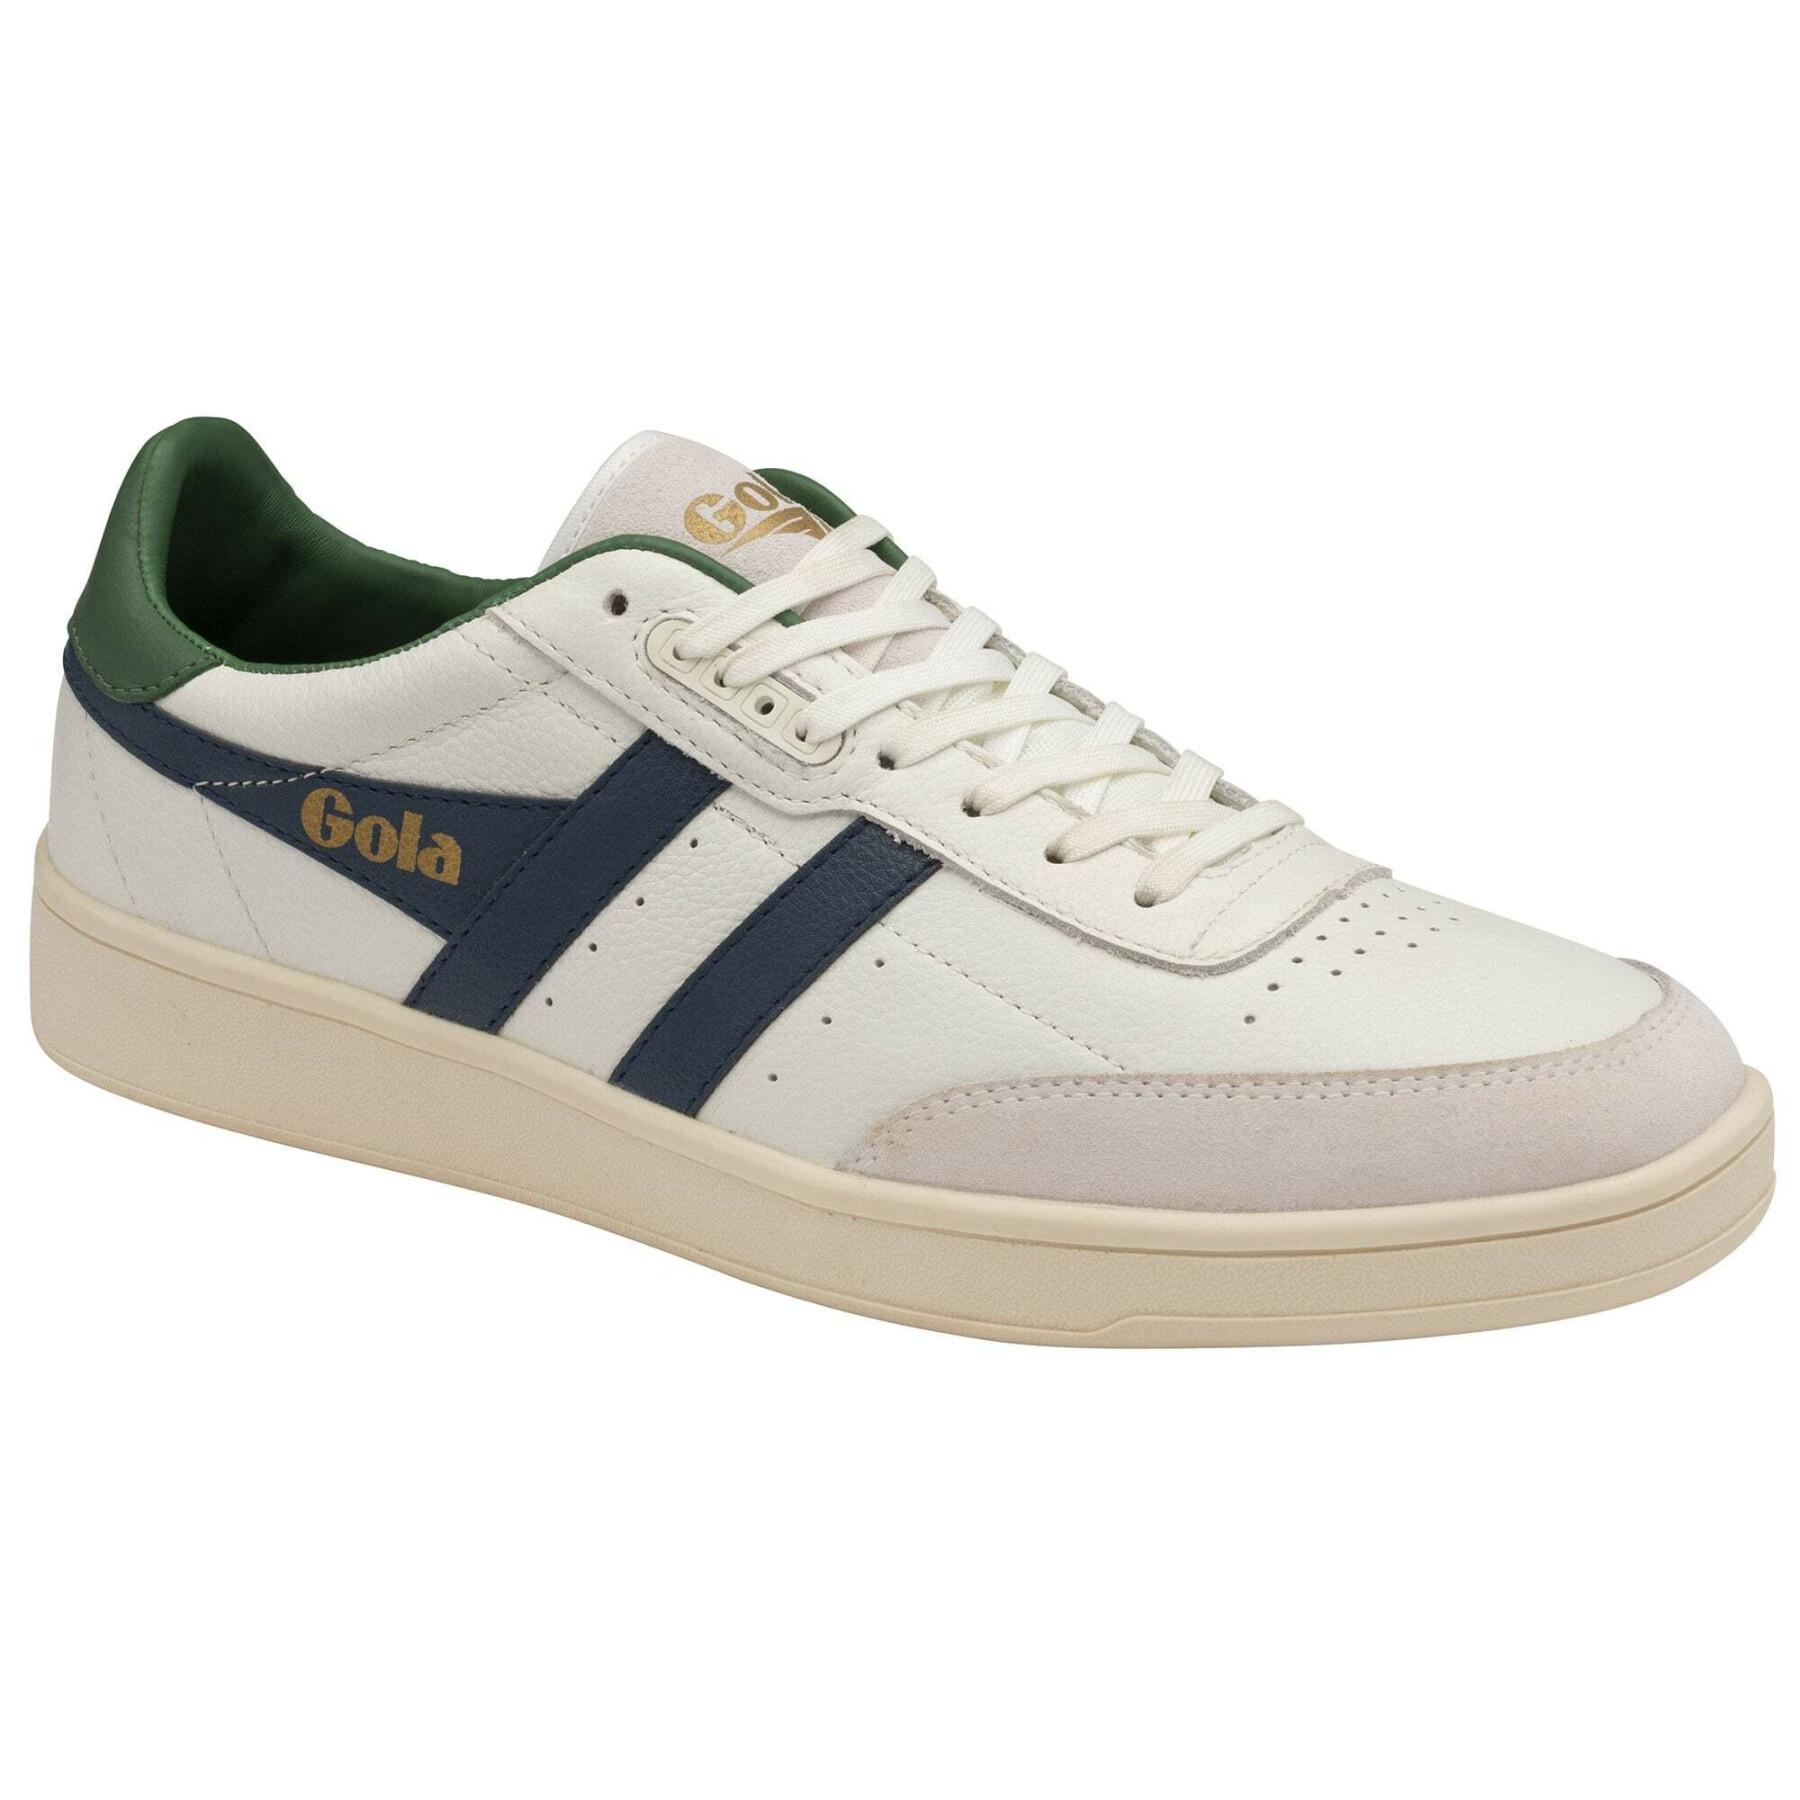 Instrutores Gola Classics Contact Leather Trainers